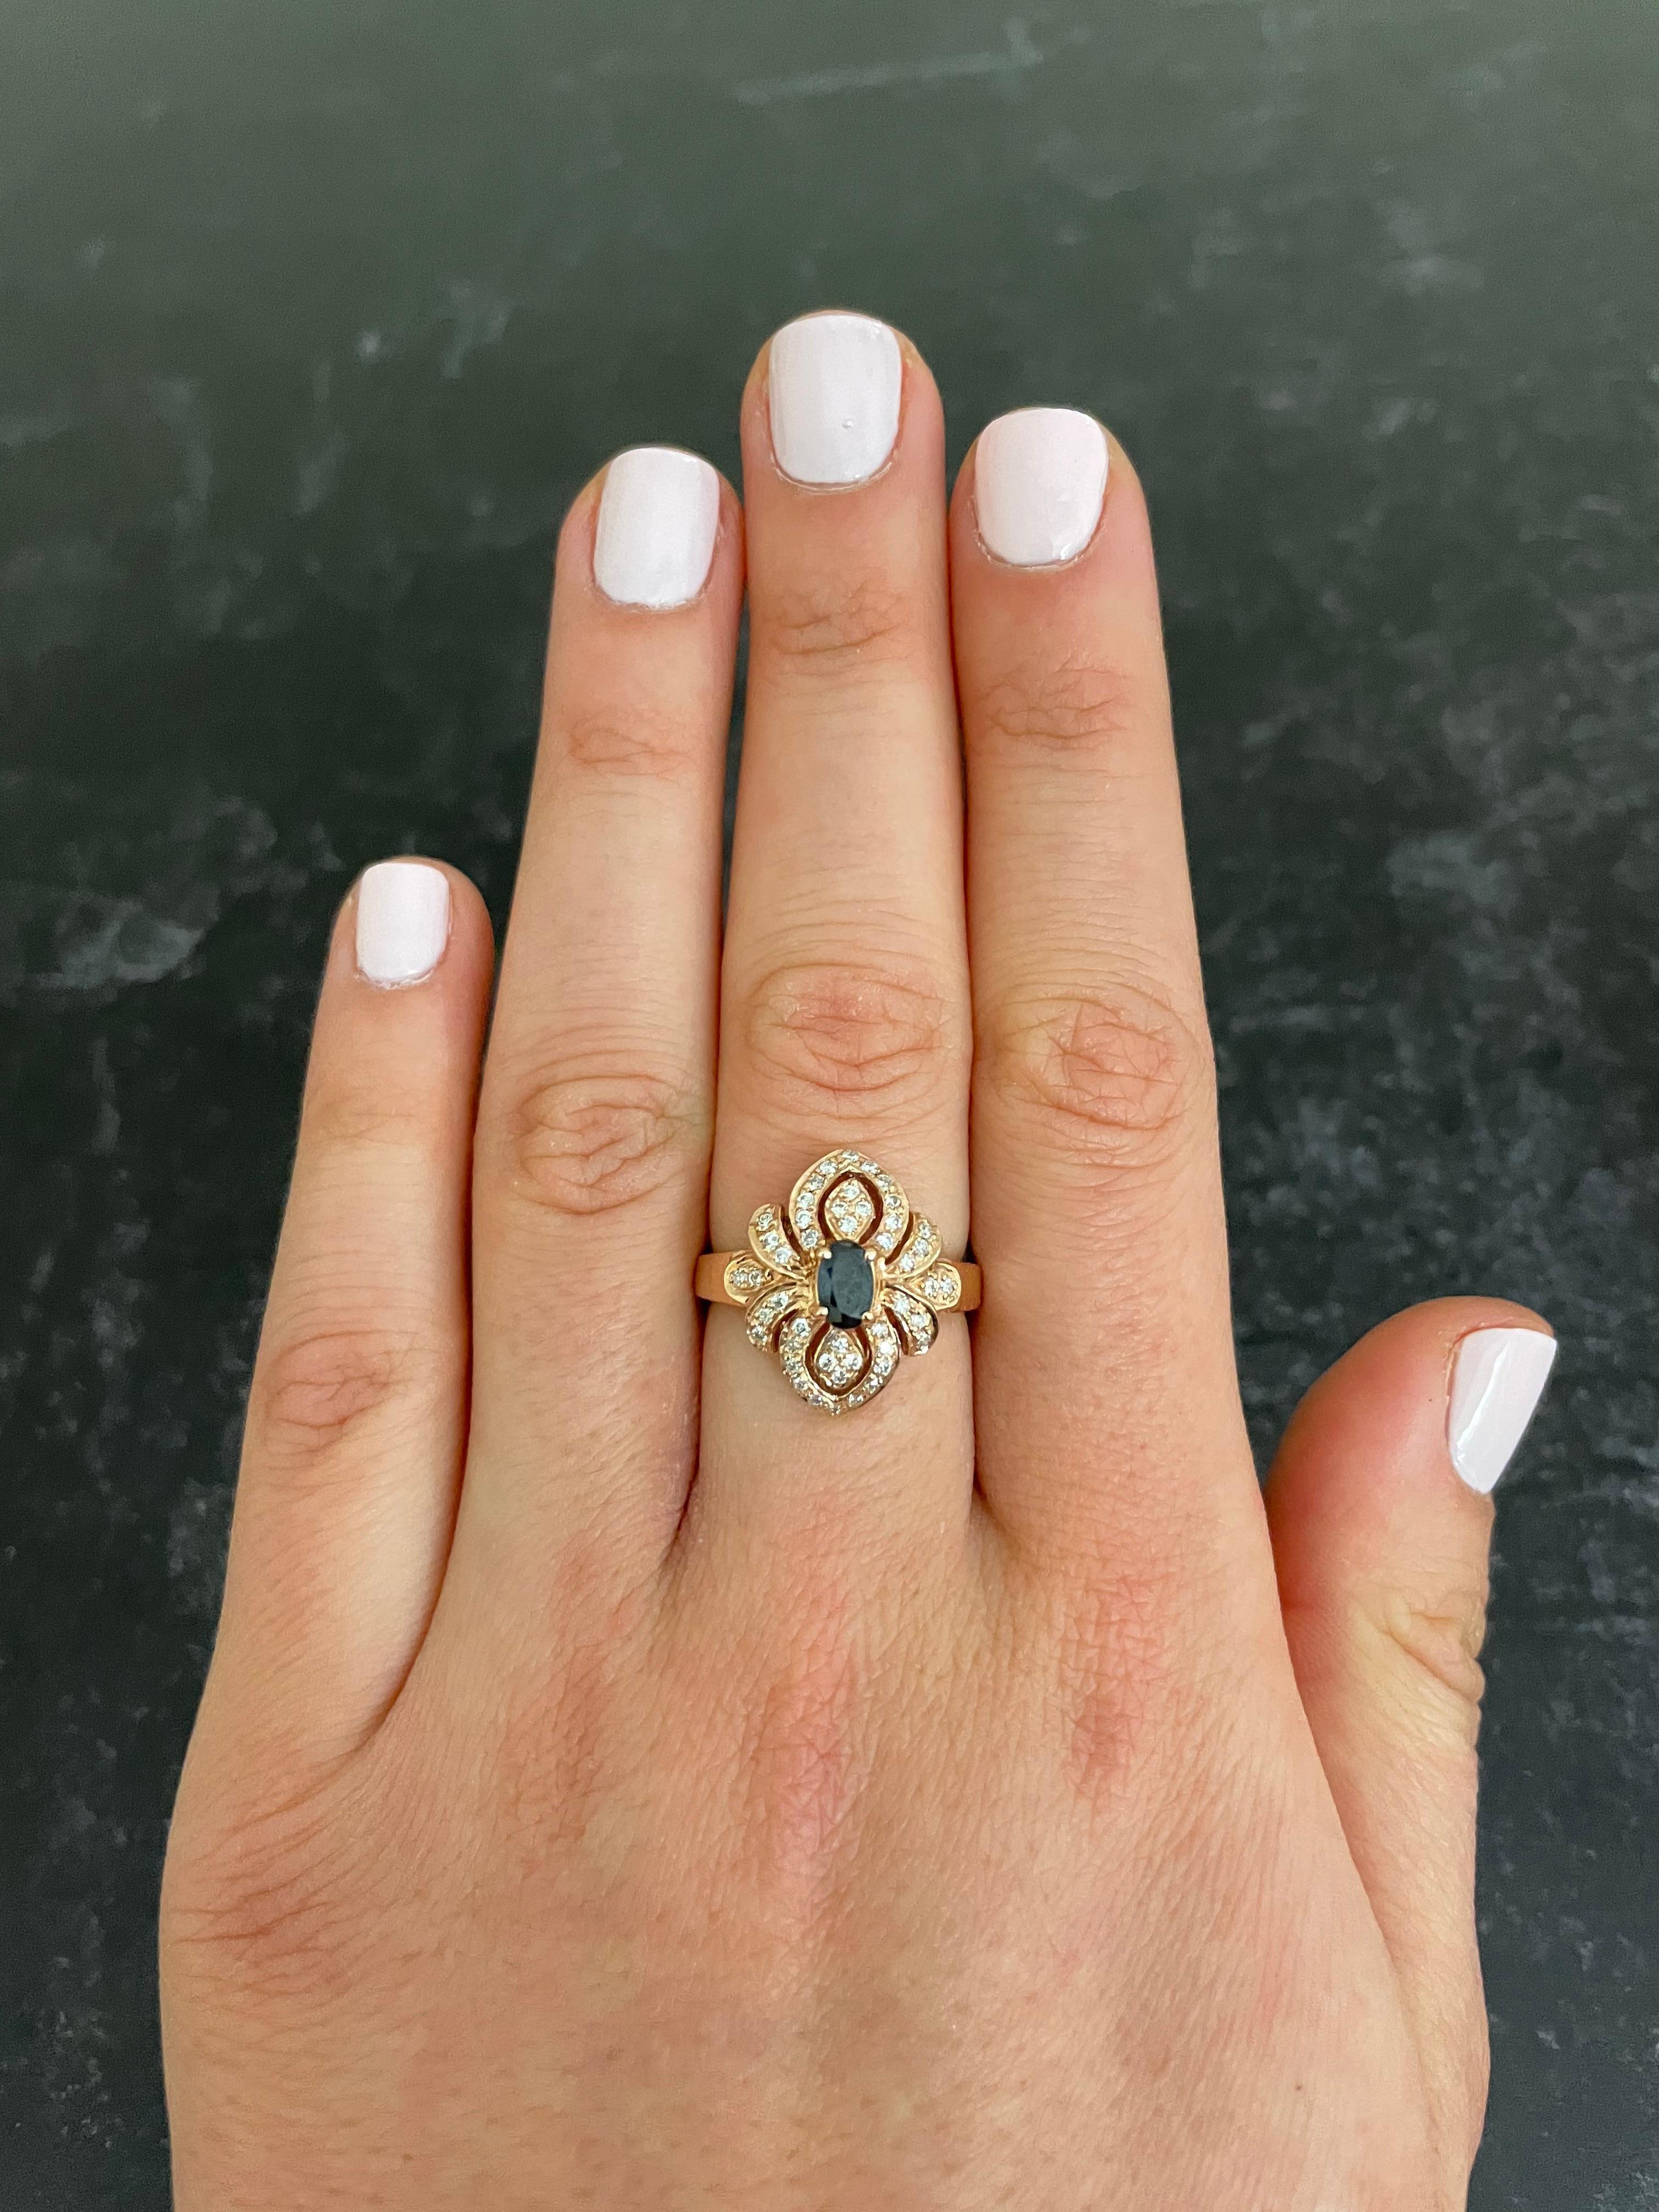 Material: 14k Rose Gold 
Center Stone Details: 1 Oval Shaped Alexandrite at 0.35 Carats Total- Measuring 4 x 5 mm
Mounting Diamond Details: 46 Brilliant Round White Diamonds at Approximately 0.30 Carats - Clarity: SI / Color: H-I
Ring Size: Size 6.5